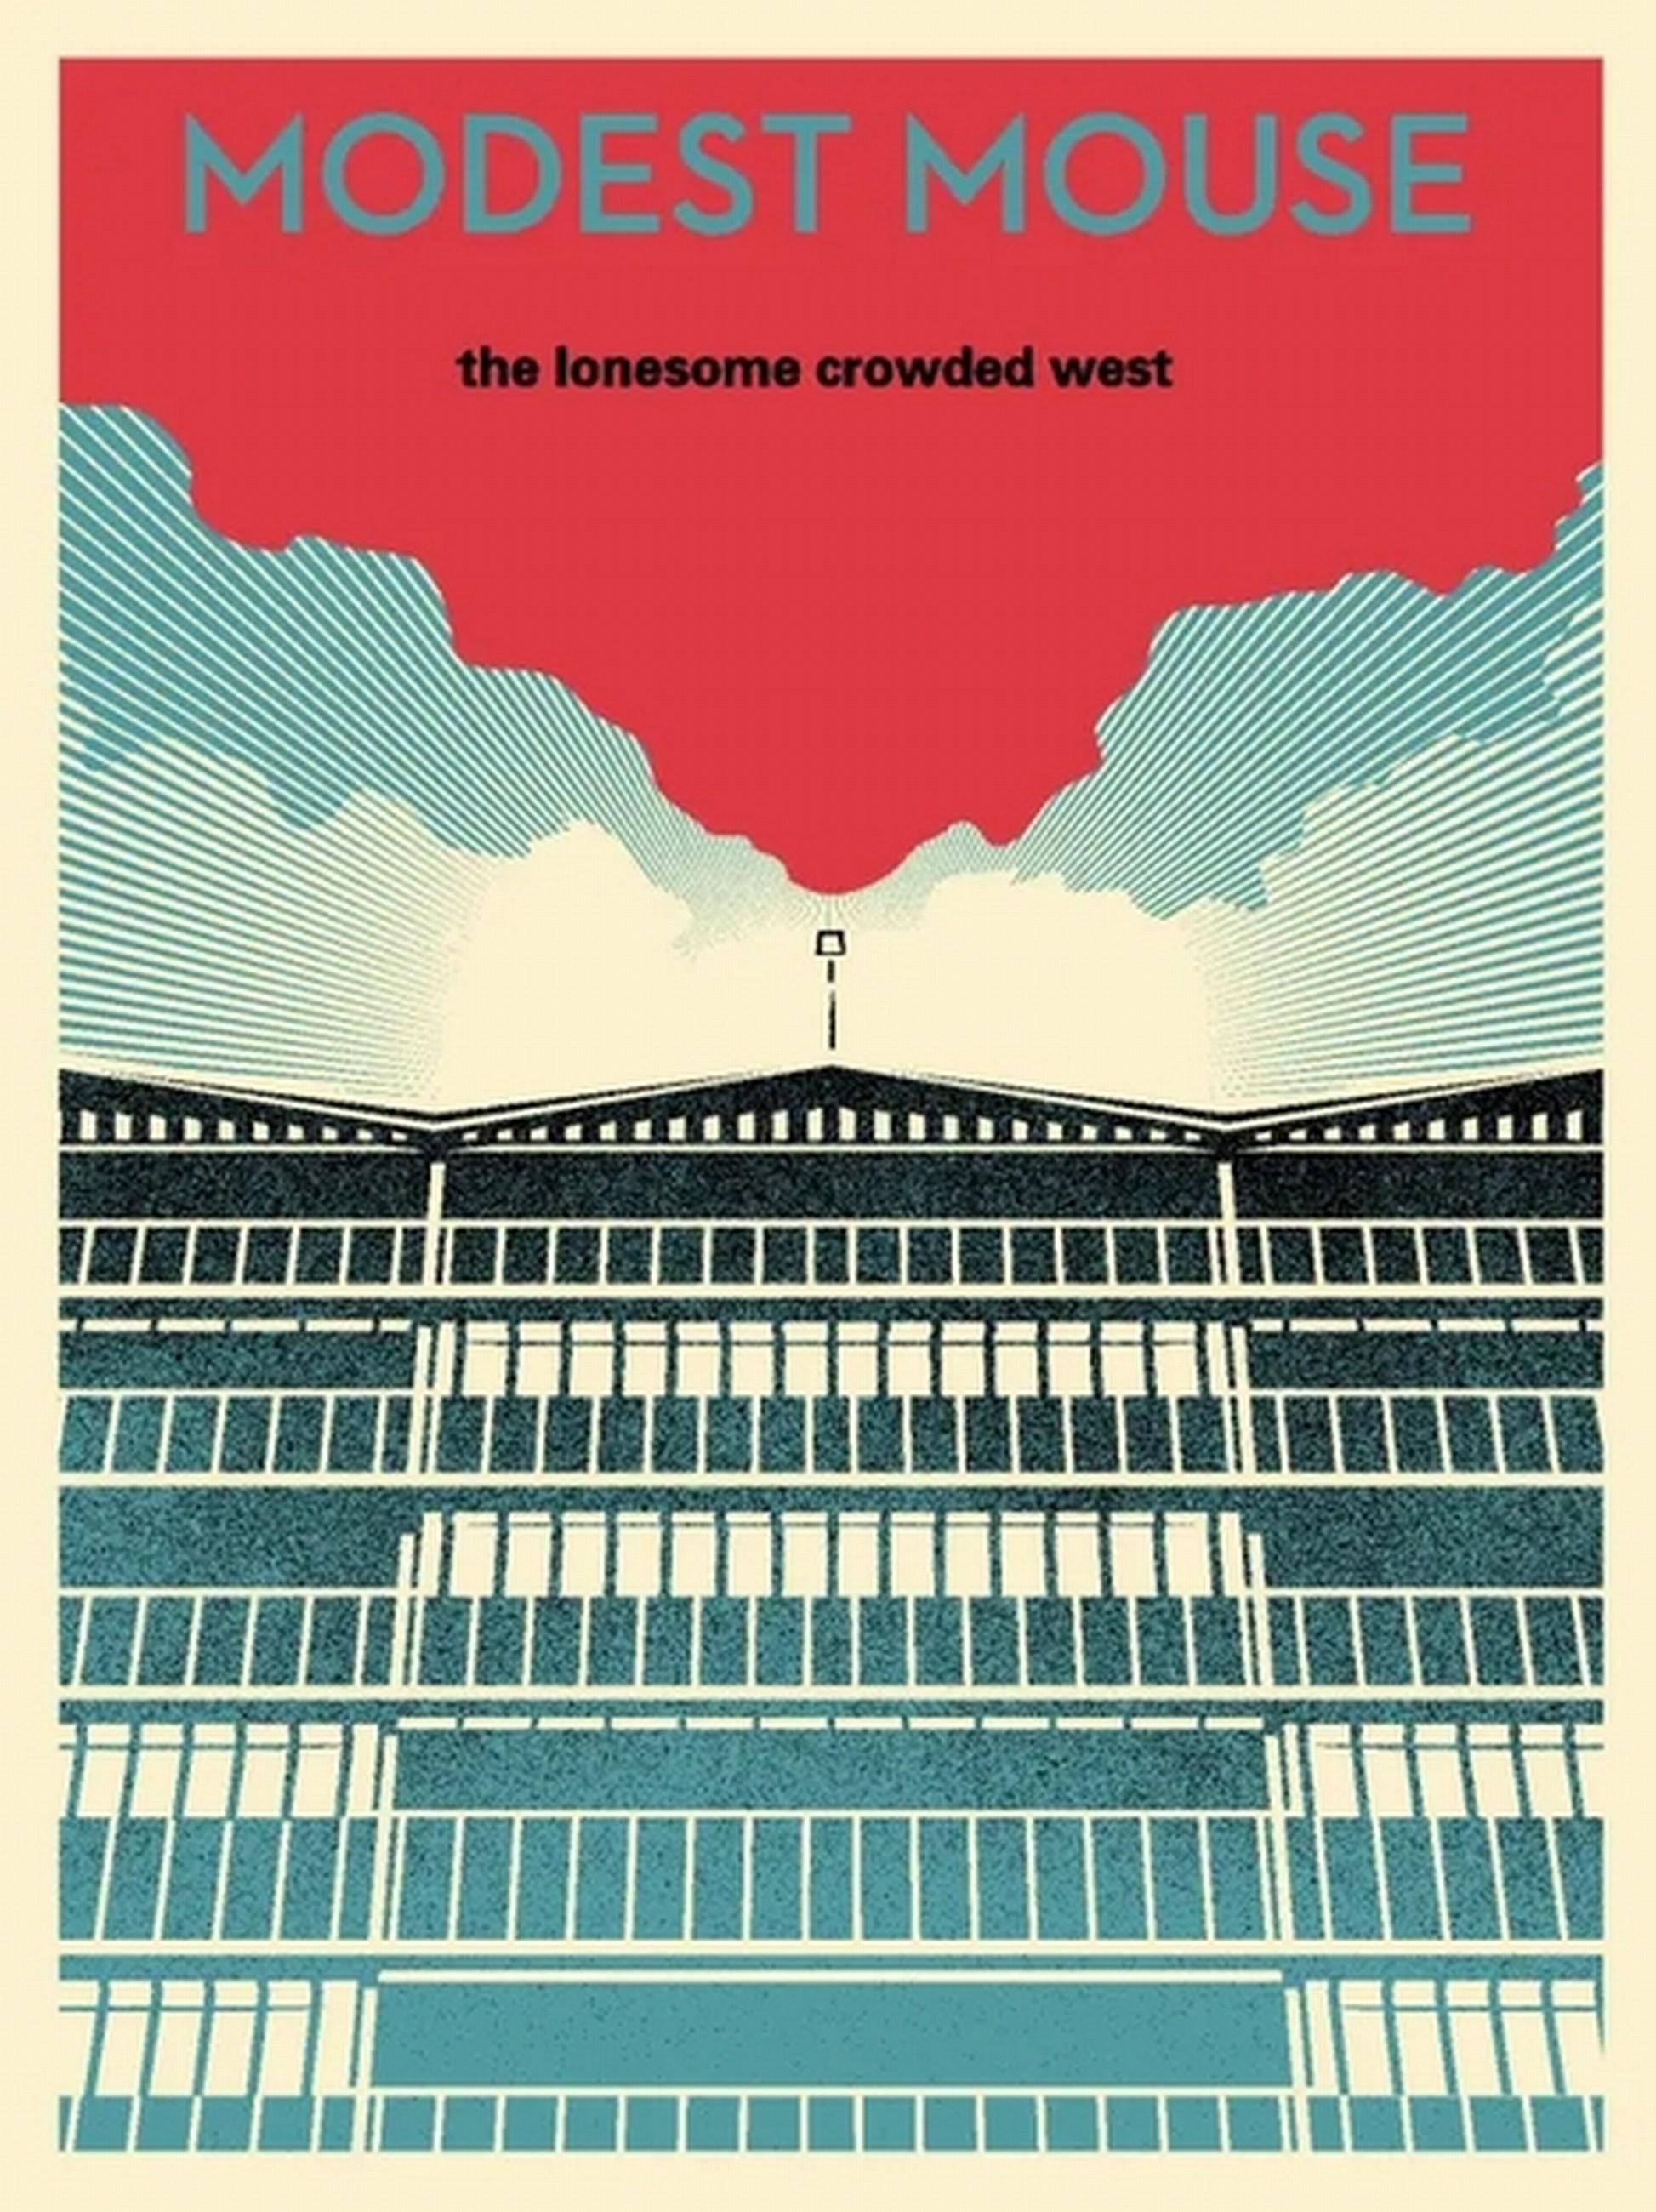 Shepard Fairey Figurative Print - The Lonesome Crowded West Apt Block (Iconic, Modest Mouse, Isaac Brock)